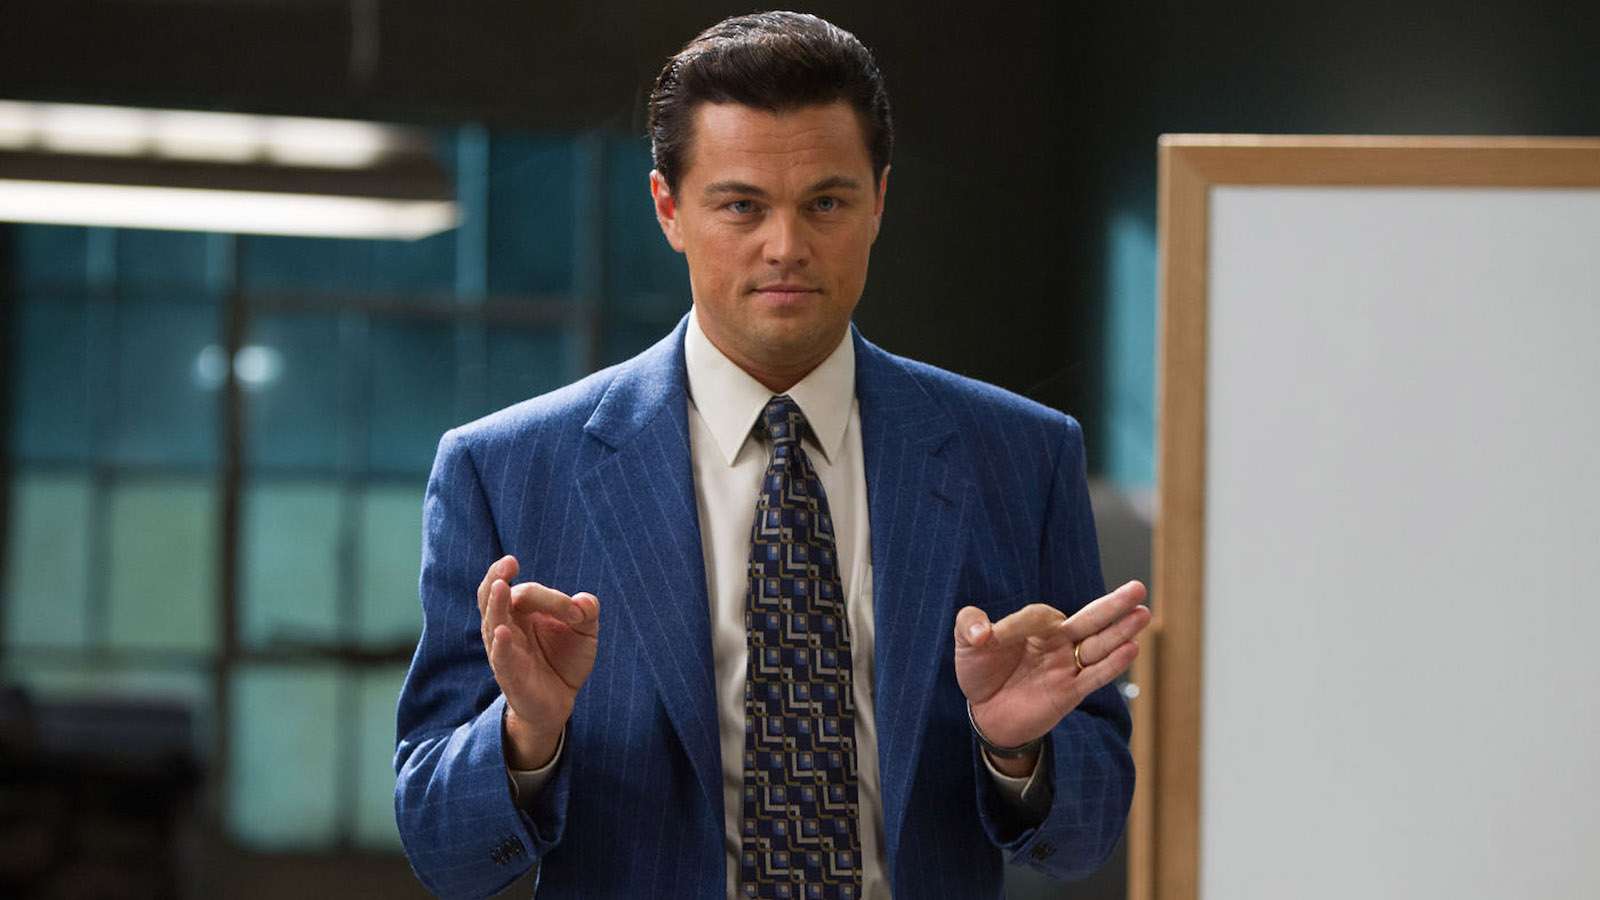 Leonardo DiCaprio in The Wolf of Wall Street